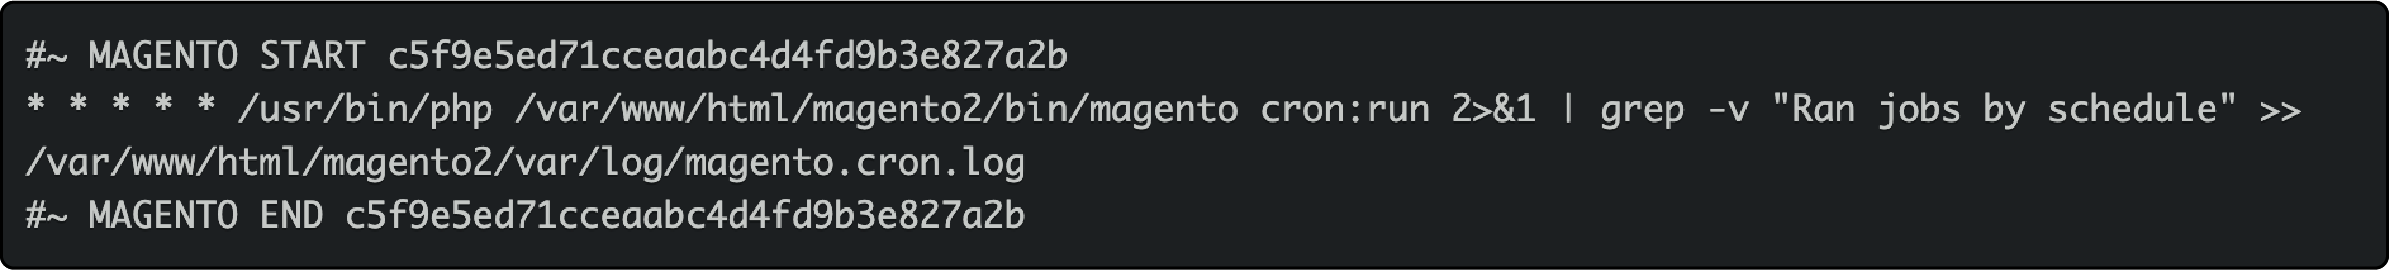 Command prompt displaying Magento 2 cron installation process with &quot;$ crontab -l&quot; command.